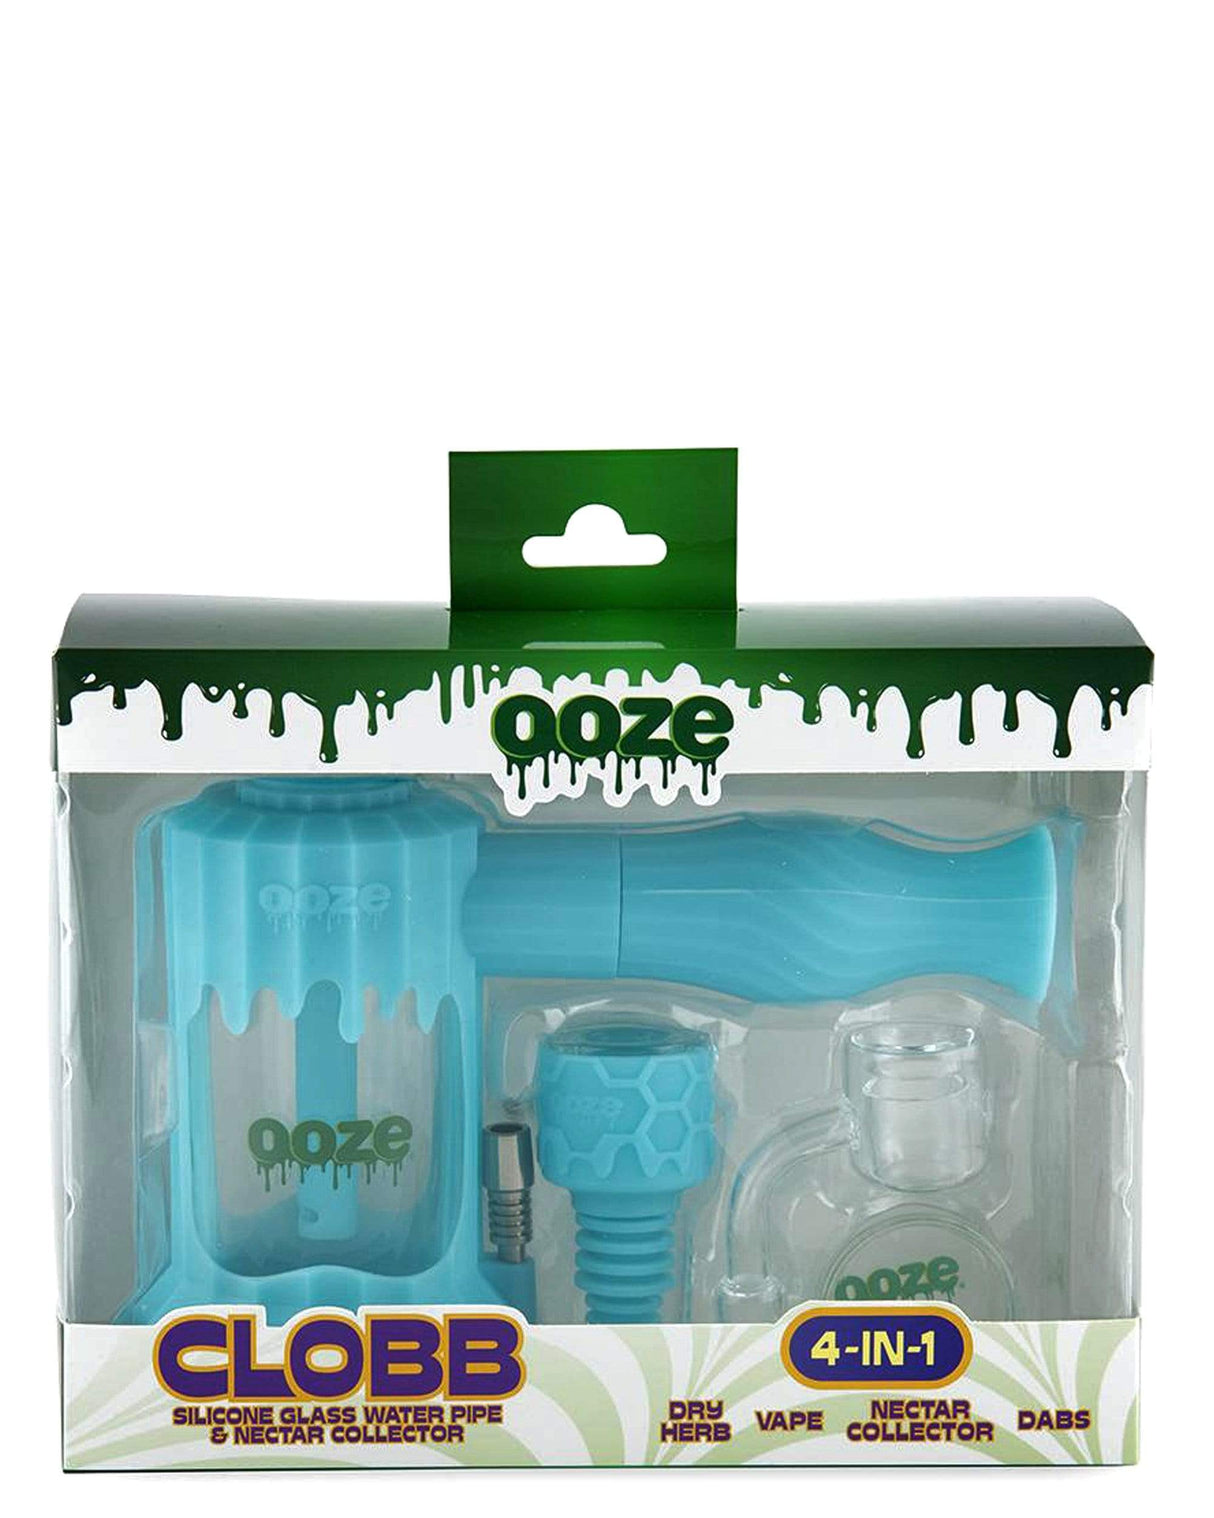 Ooze Clobb 4-in-1 Silicone Pipe in Teal, Hammer Design, for Dry Herbs & Concentrates, Front View